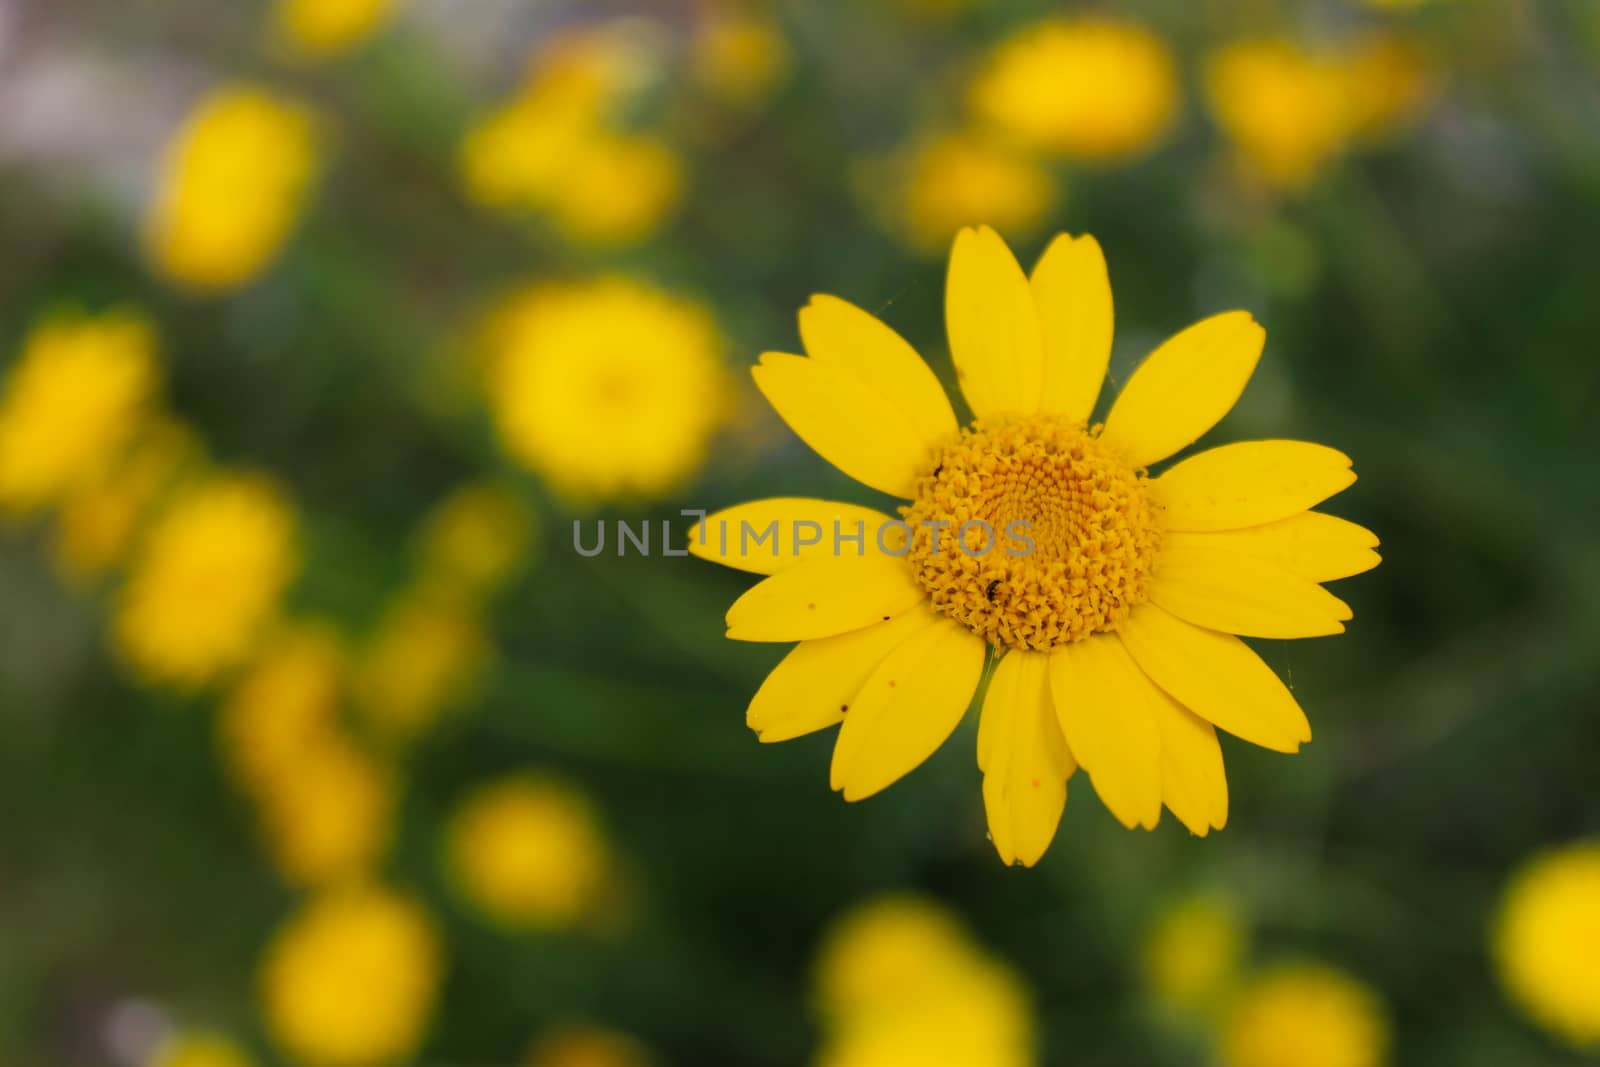 Yellow daisy in focus on green background with other yellow daisies. by mahirrov